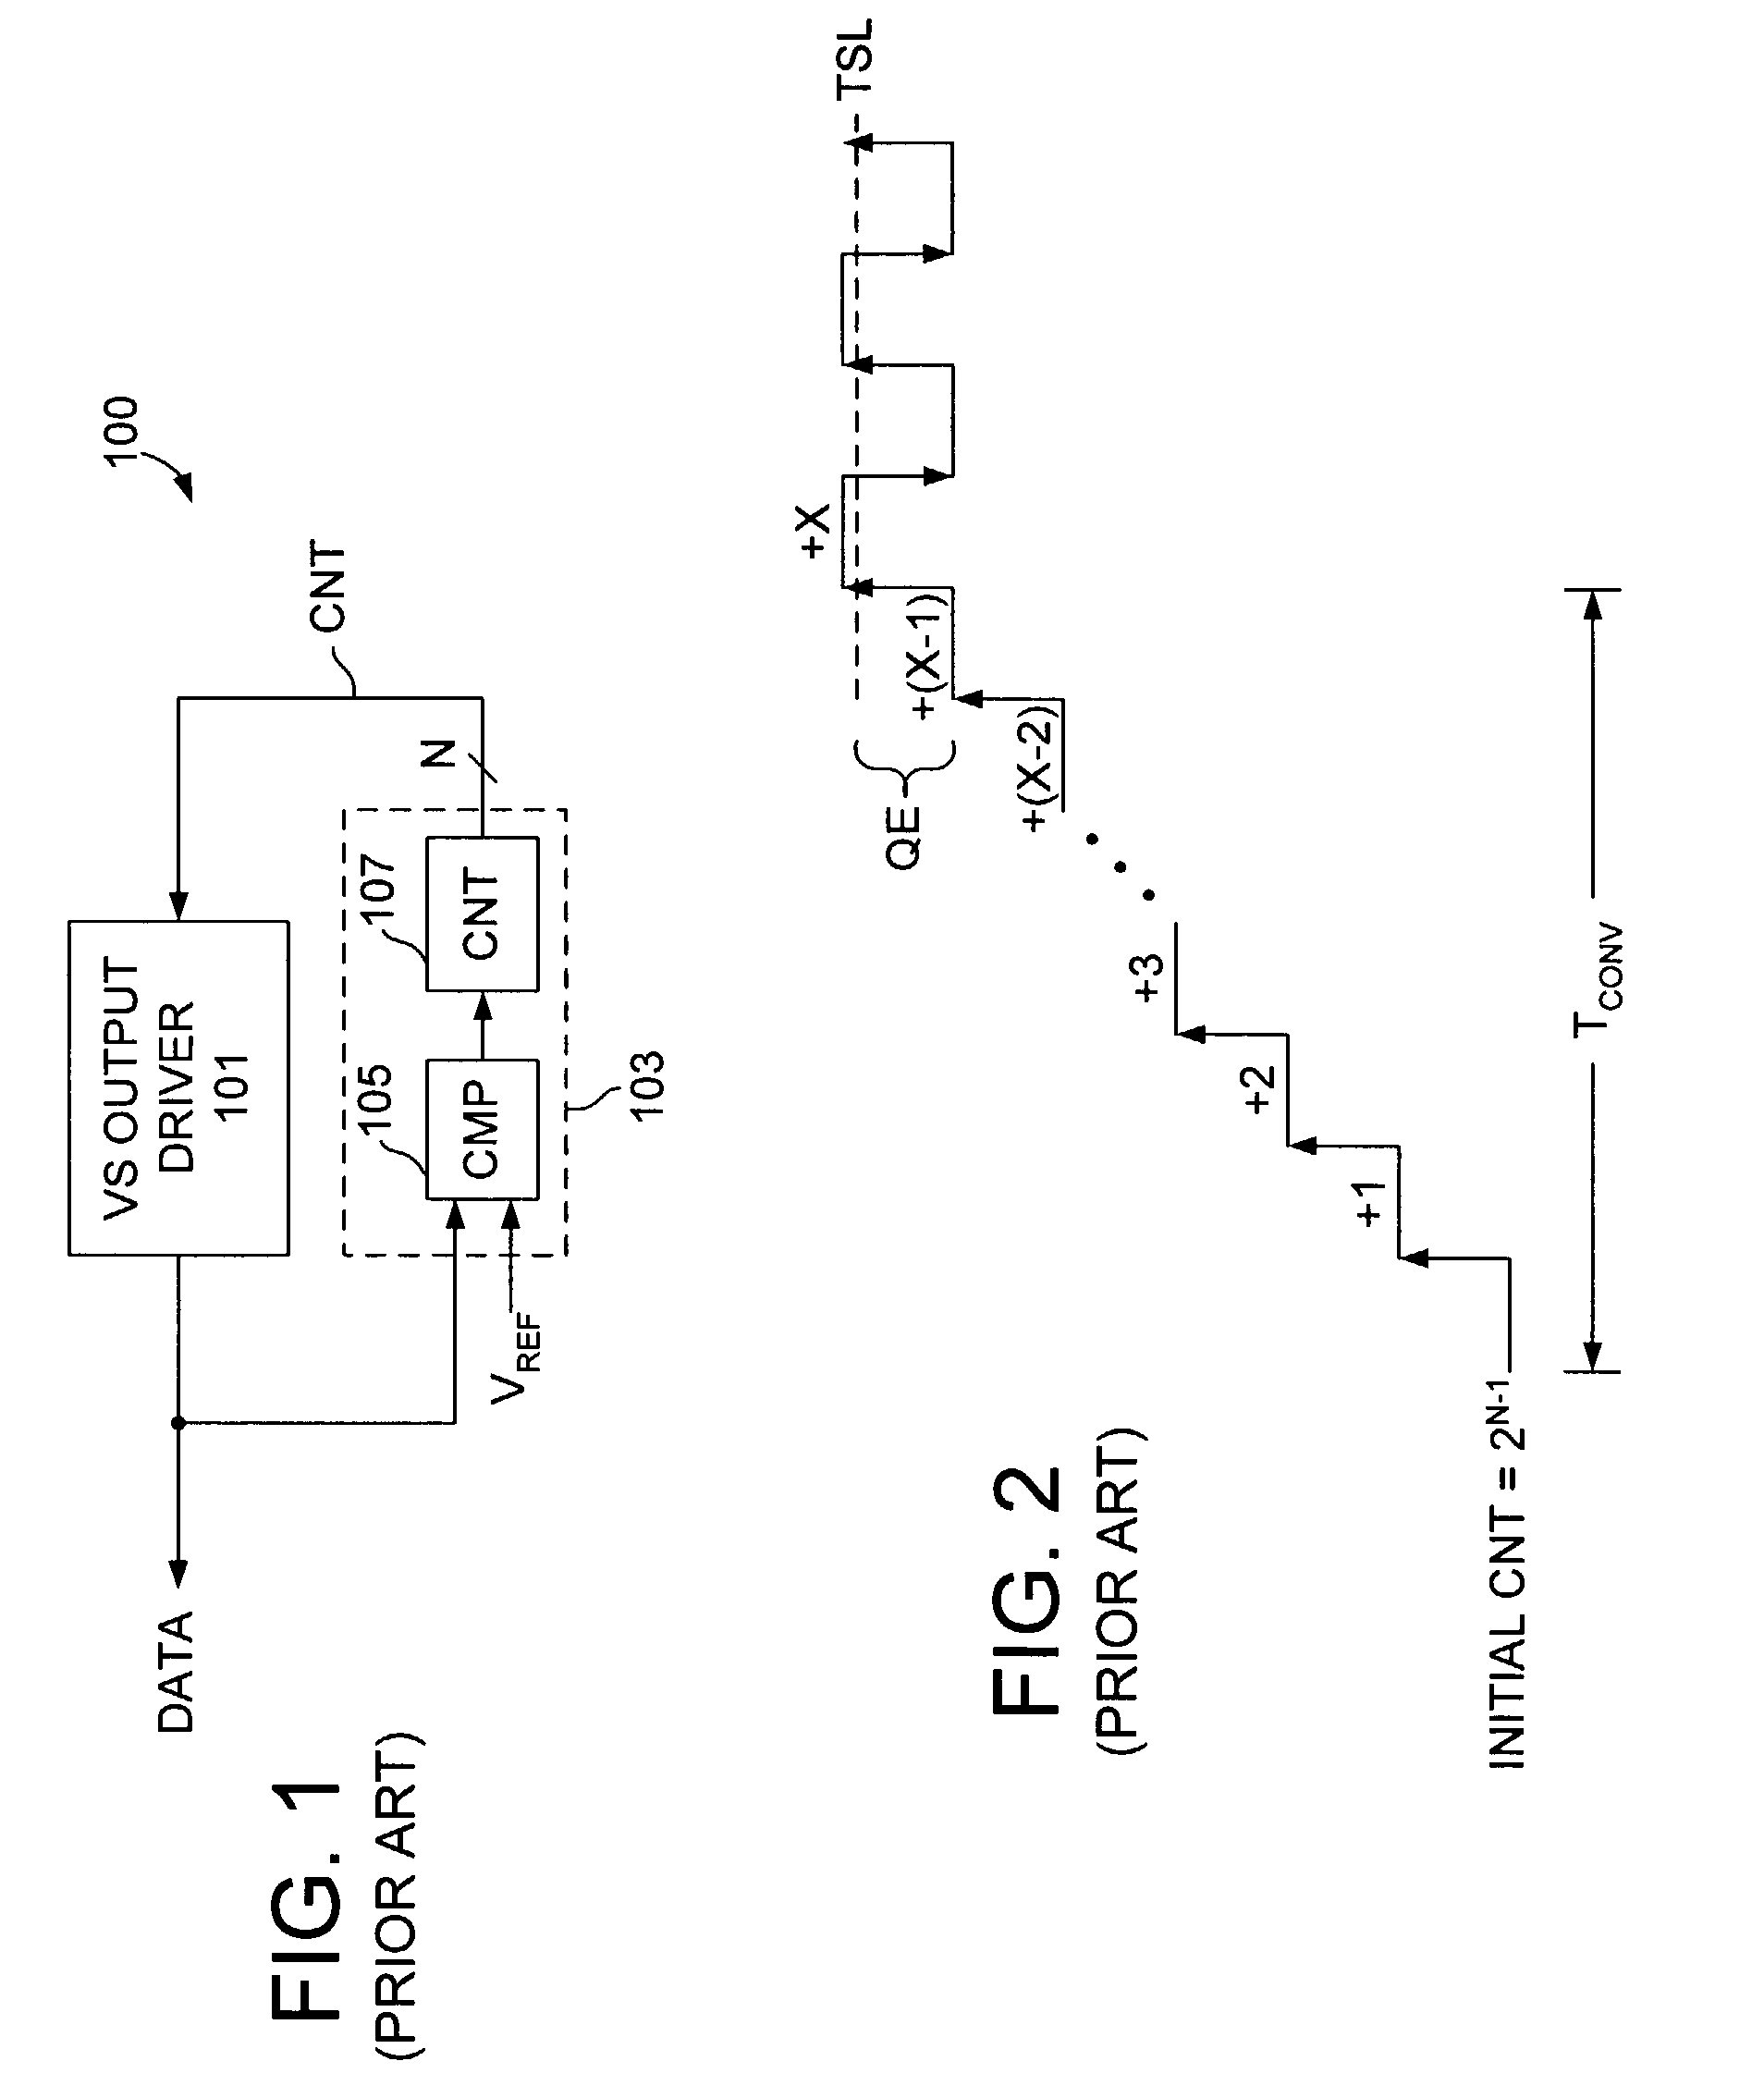 Output calibrator with dynamic precision